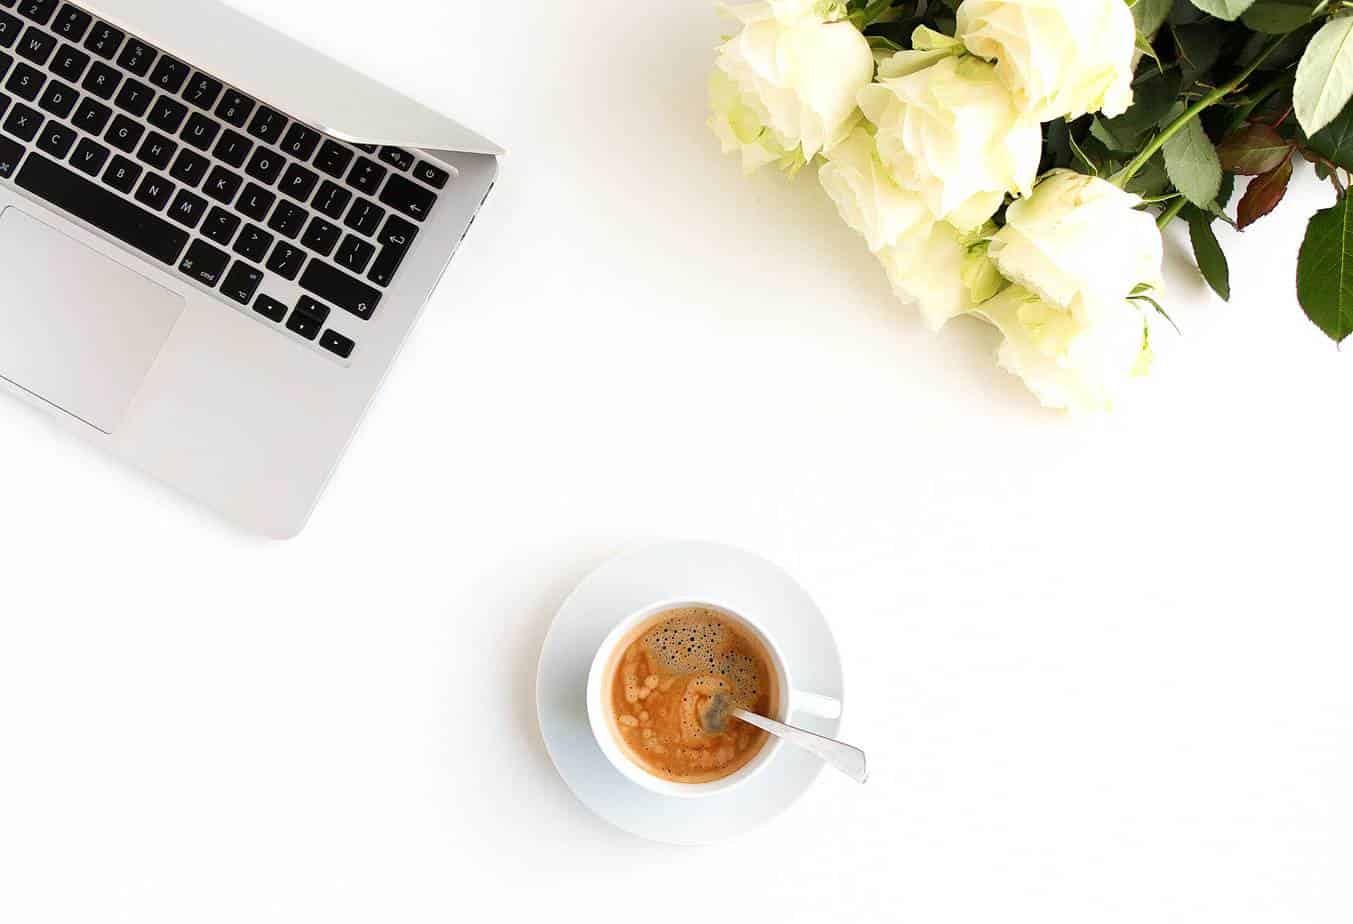 Roses, coffee, and laptop on a desk.